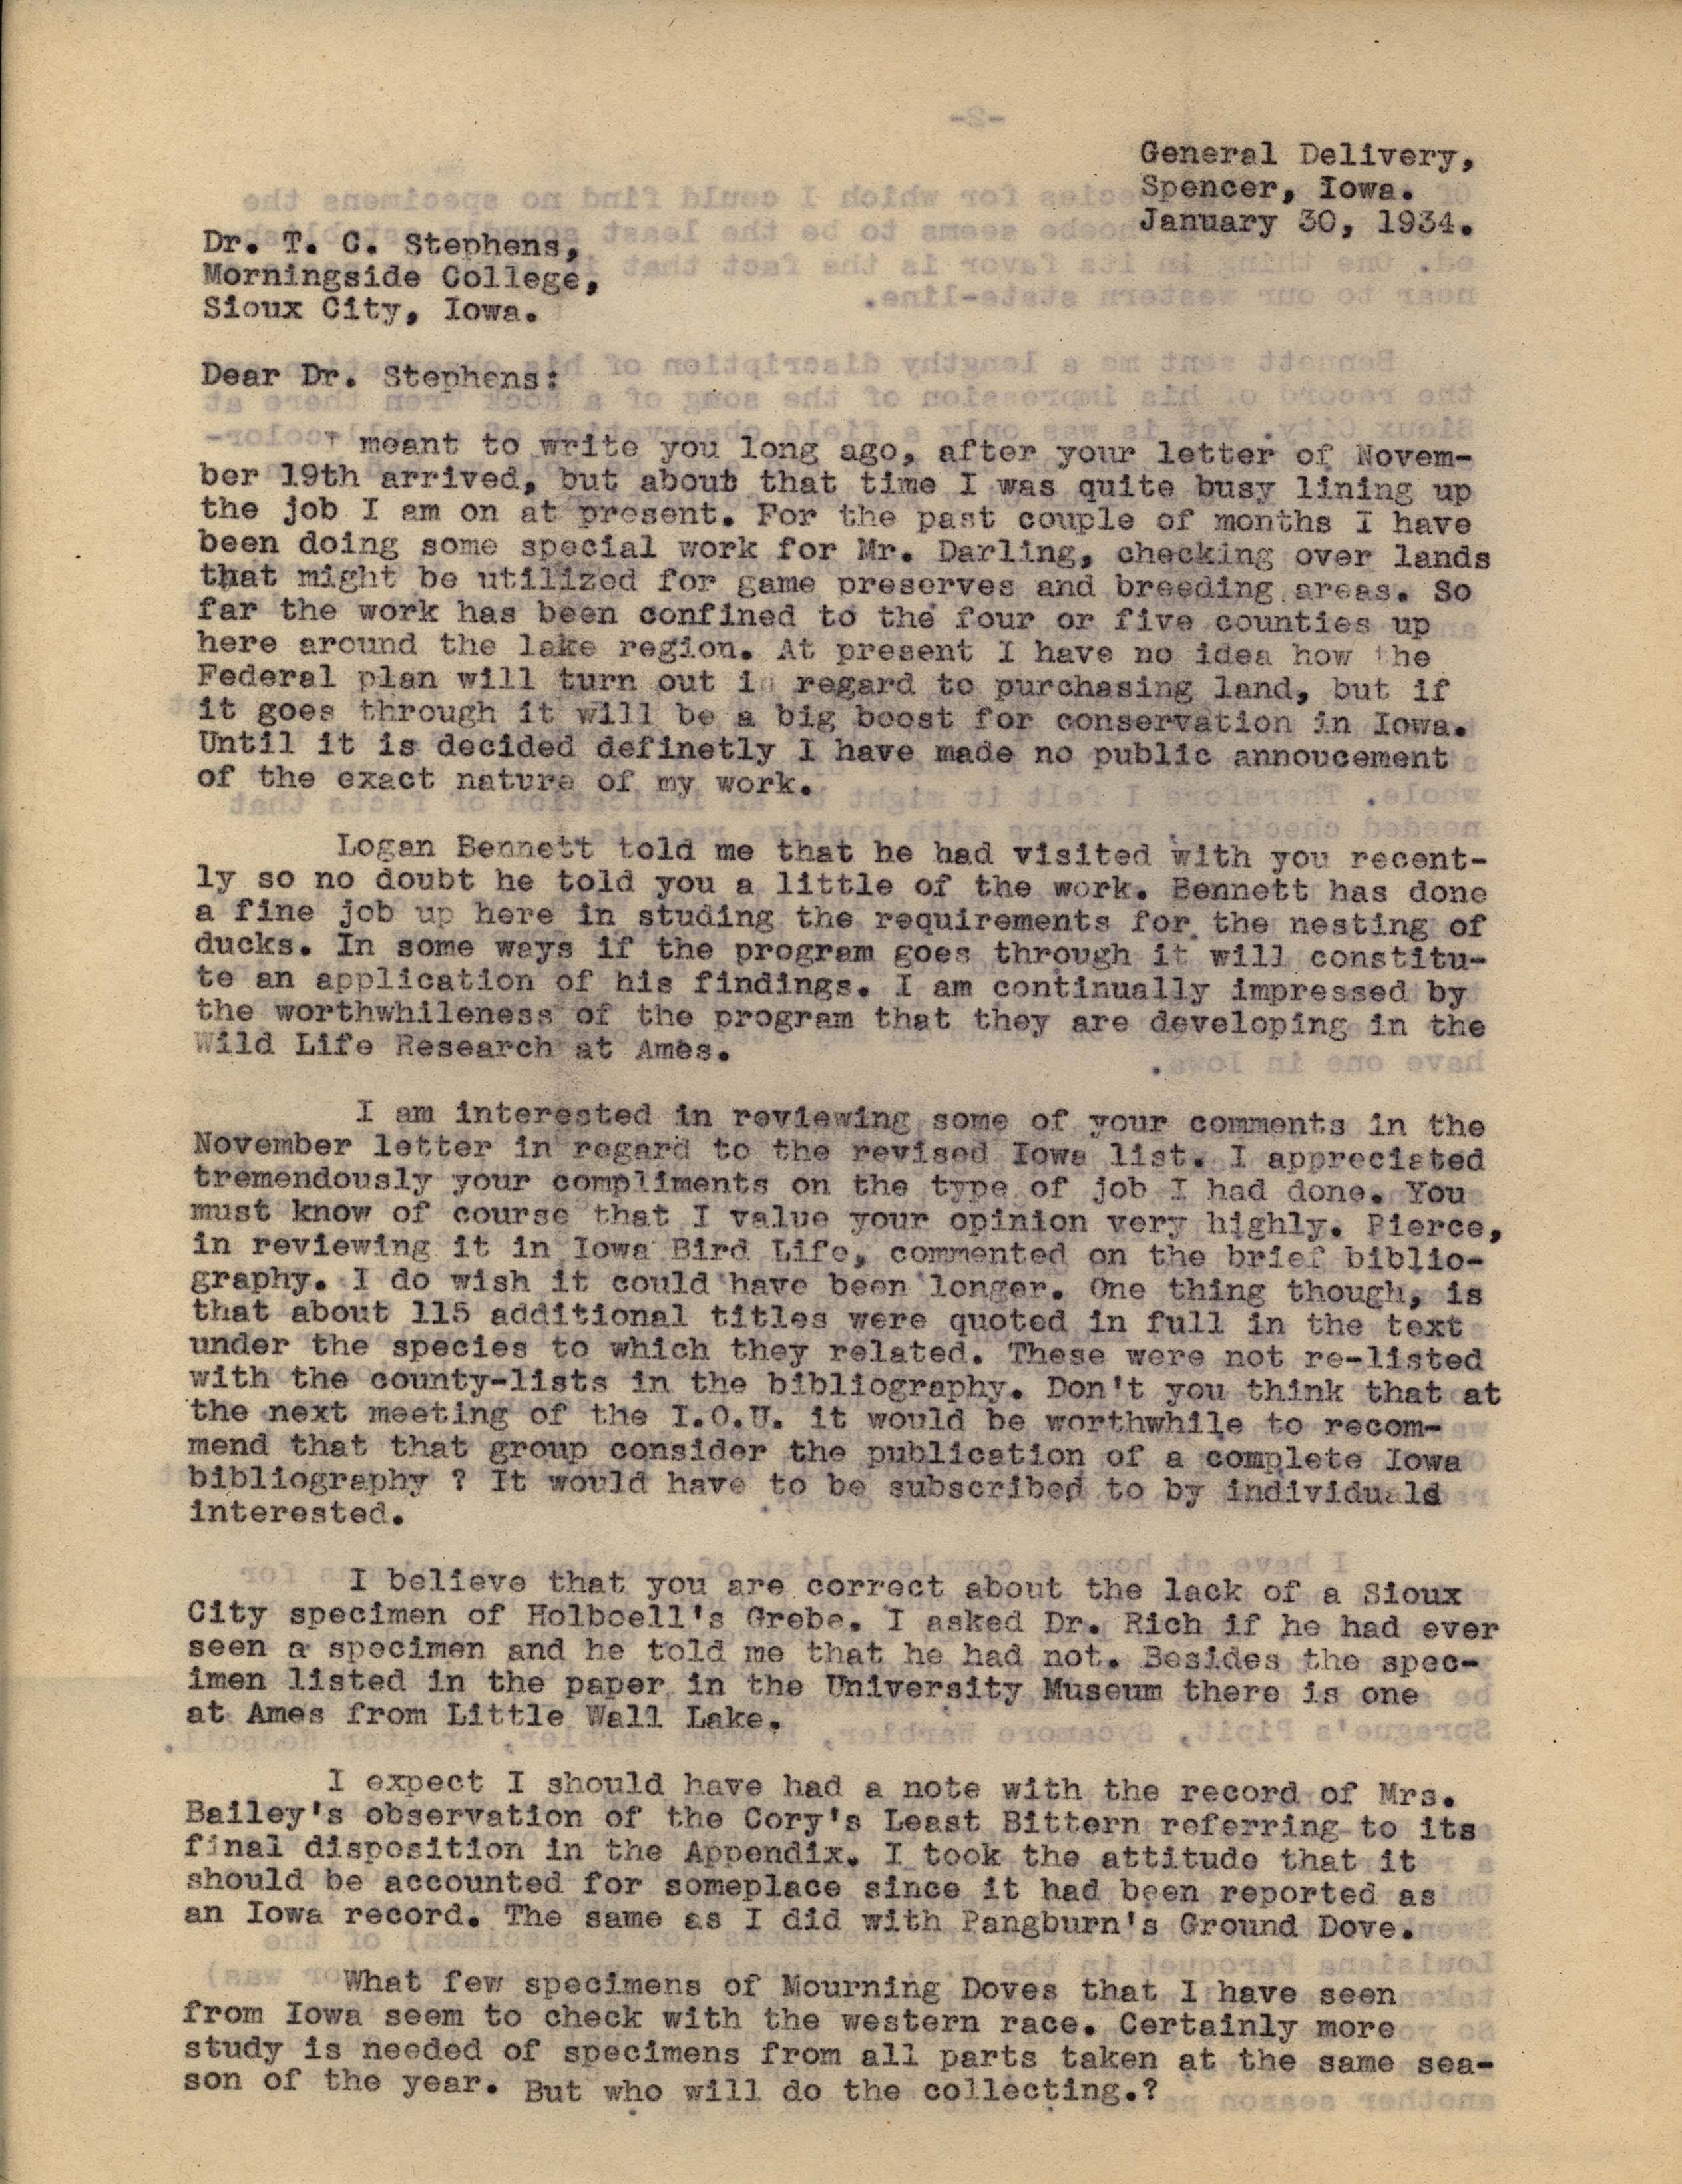 Philip DuMont letter to Thomas Stephens regarding questionable birds in the Revised List of Iowa Birds, January 30, 1934